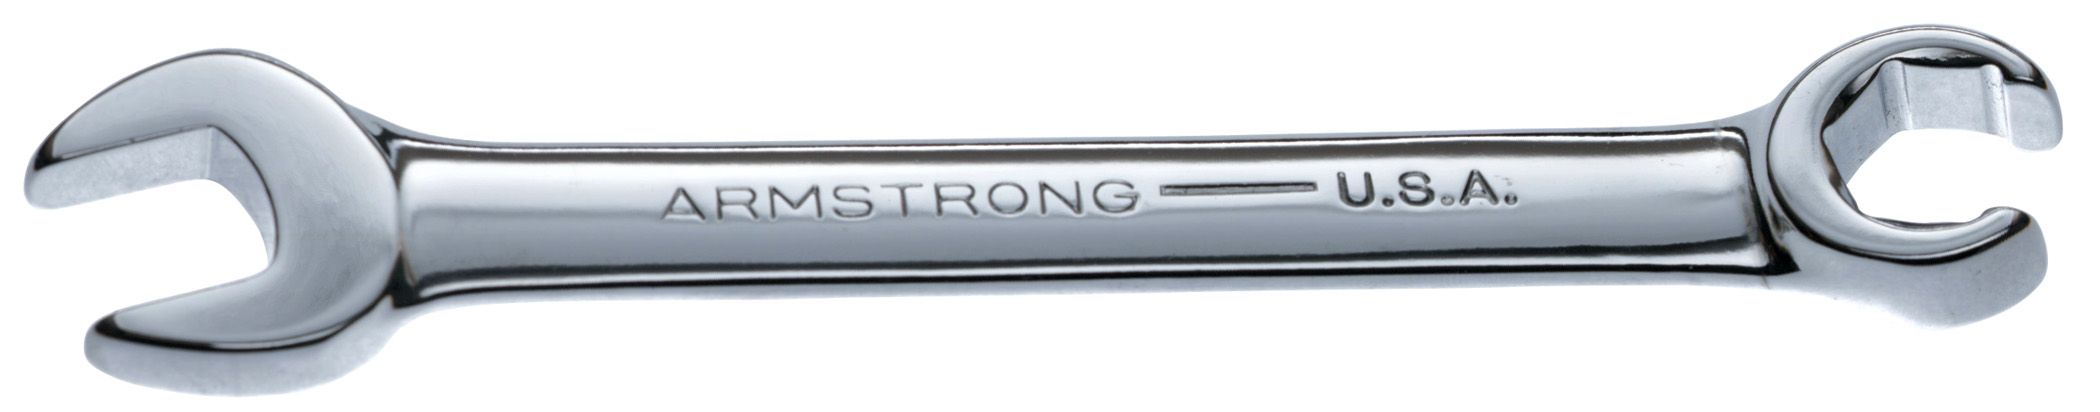 Armstrong 7/16 in. 6 pt. Full Polish Combination Flare Nut Wrench